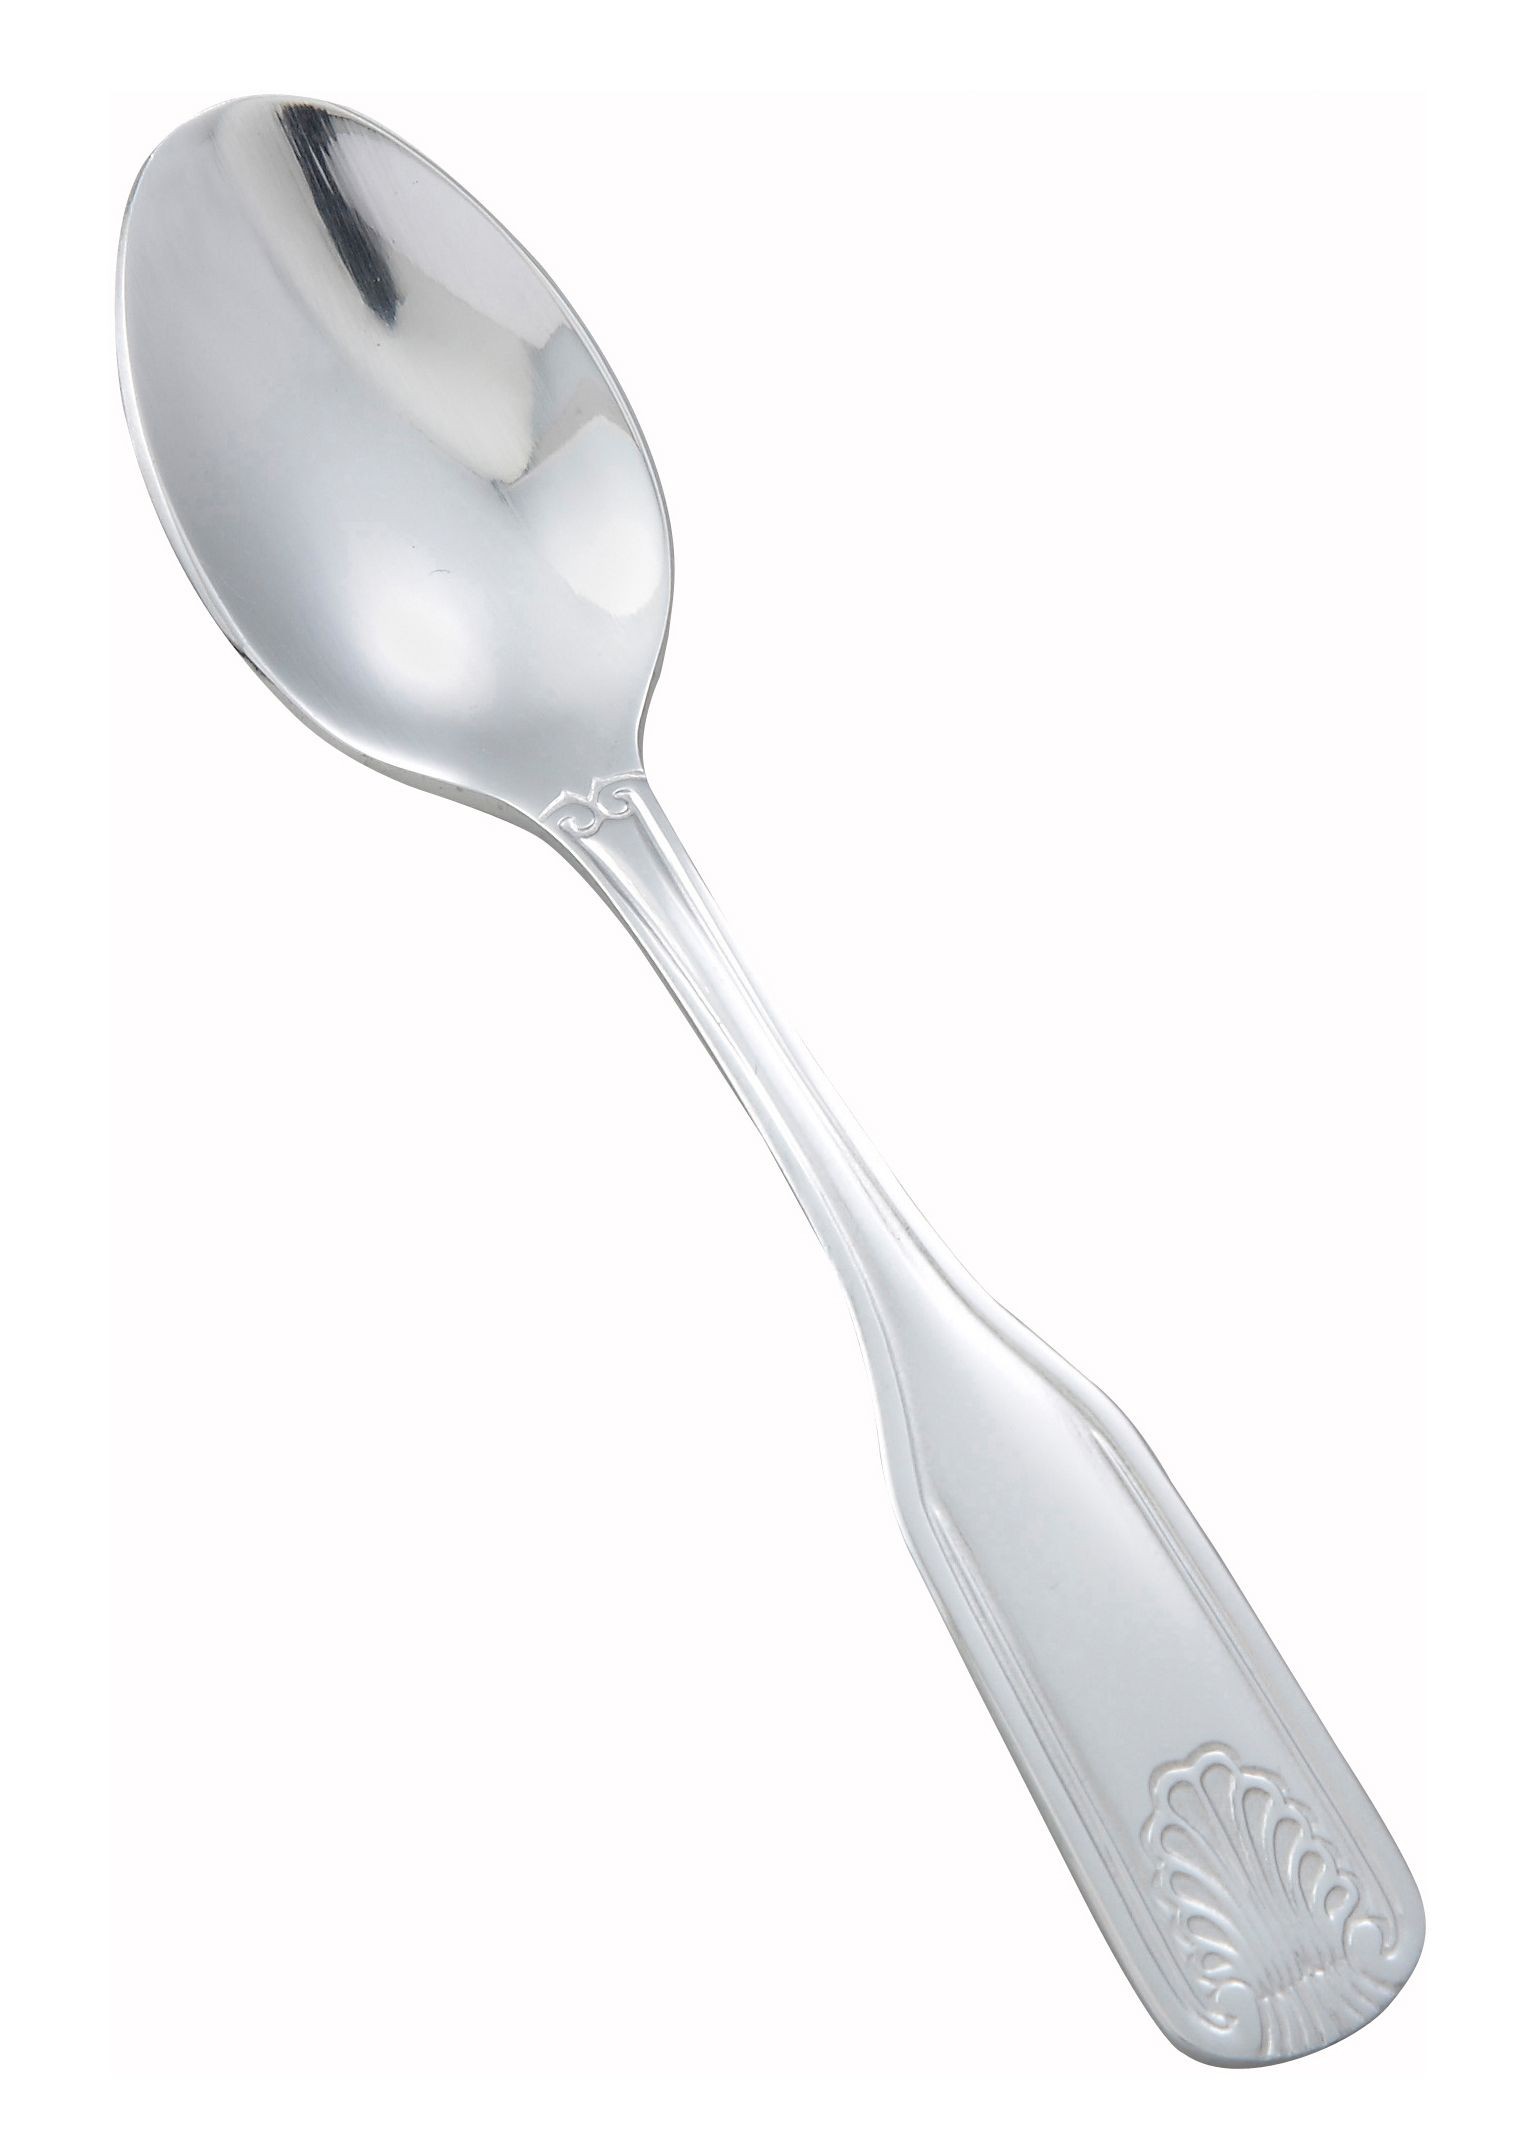 Winco 0006-09 Toulouse Heavy Mirror Finish Stainless Steel Demitasse Spoon (12/Pack)